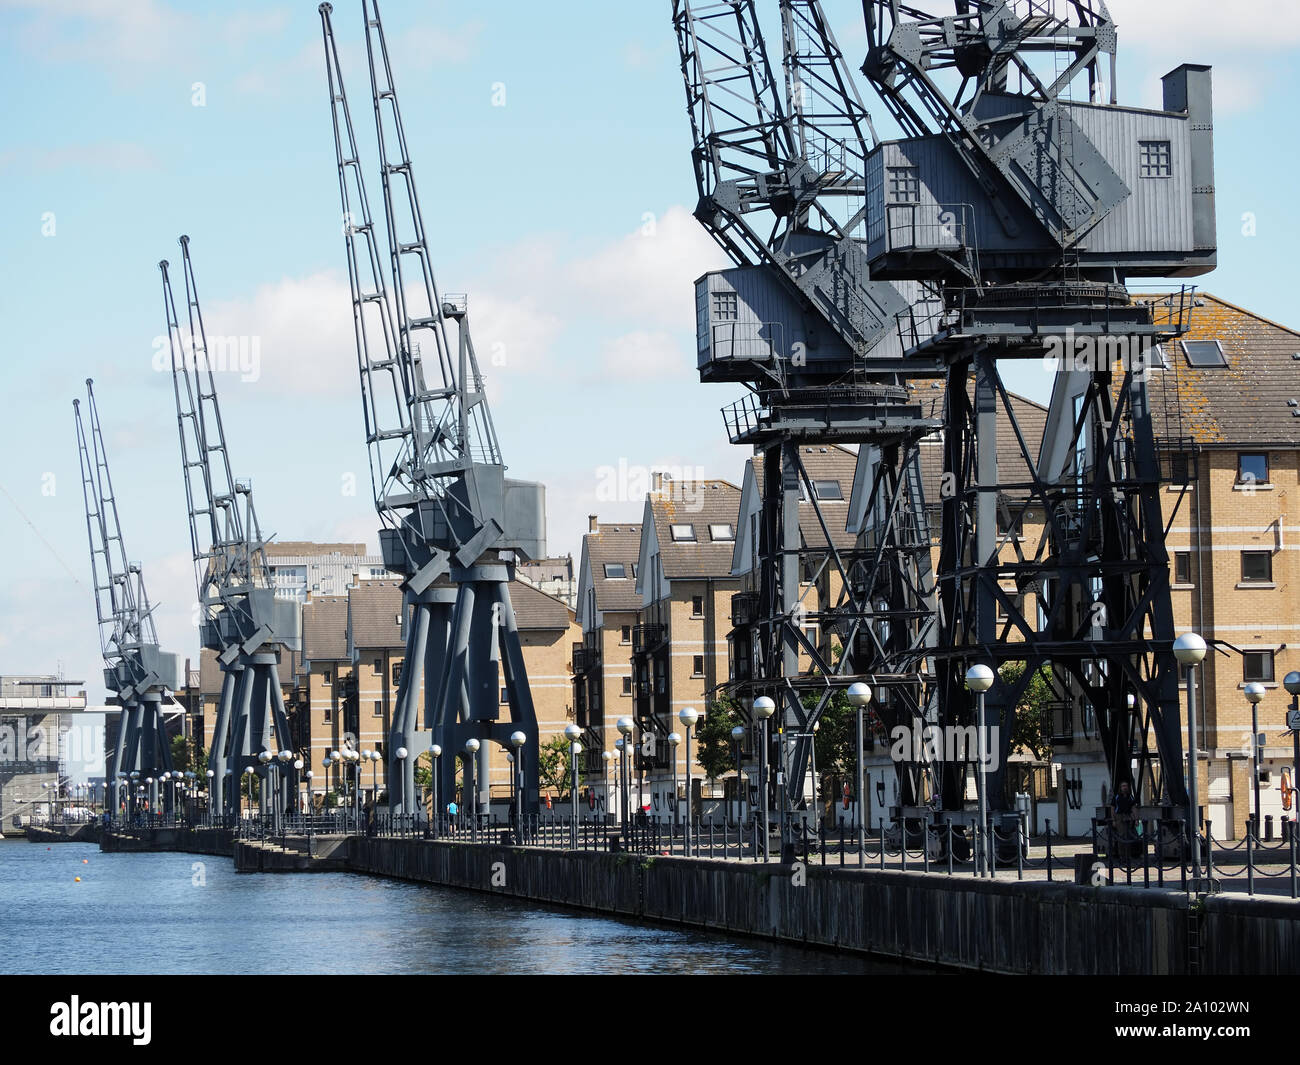 View of a row of cranes on the south side of the Royal Victoria Docks in London Stock Photo